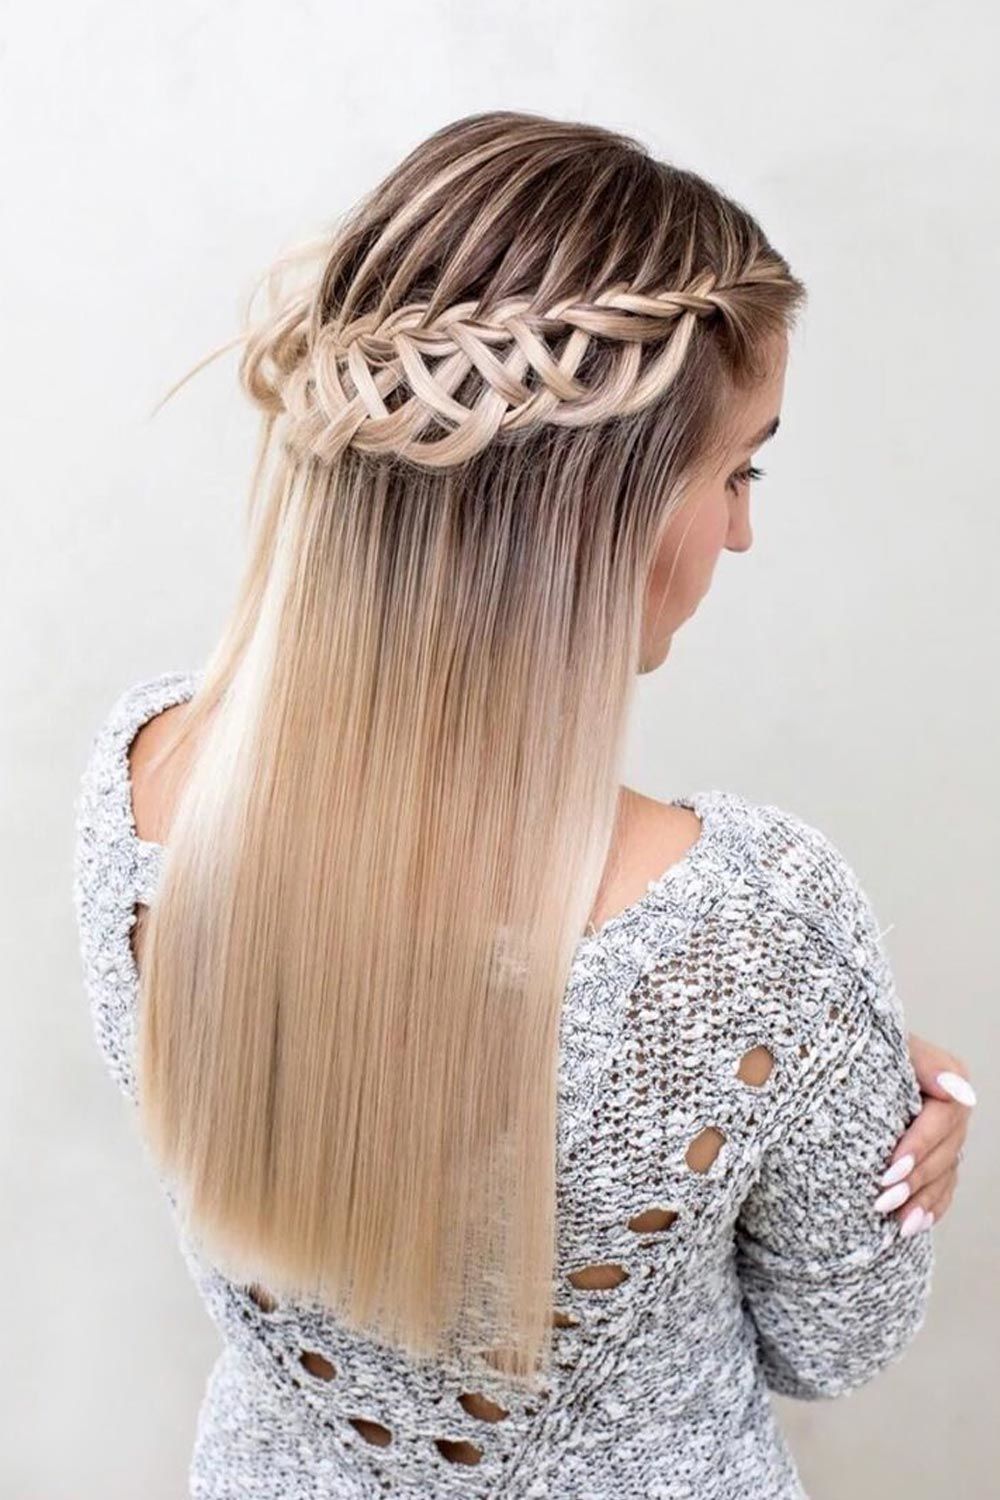 Long Blonde Hair Style With Ladder Braid